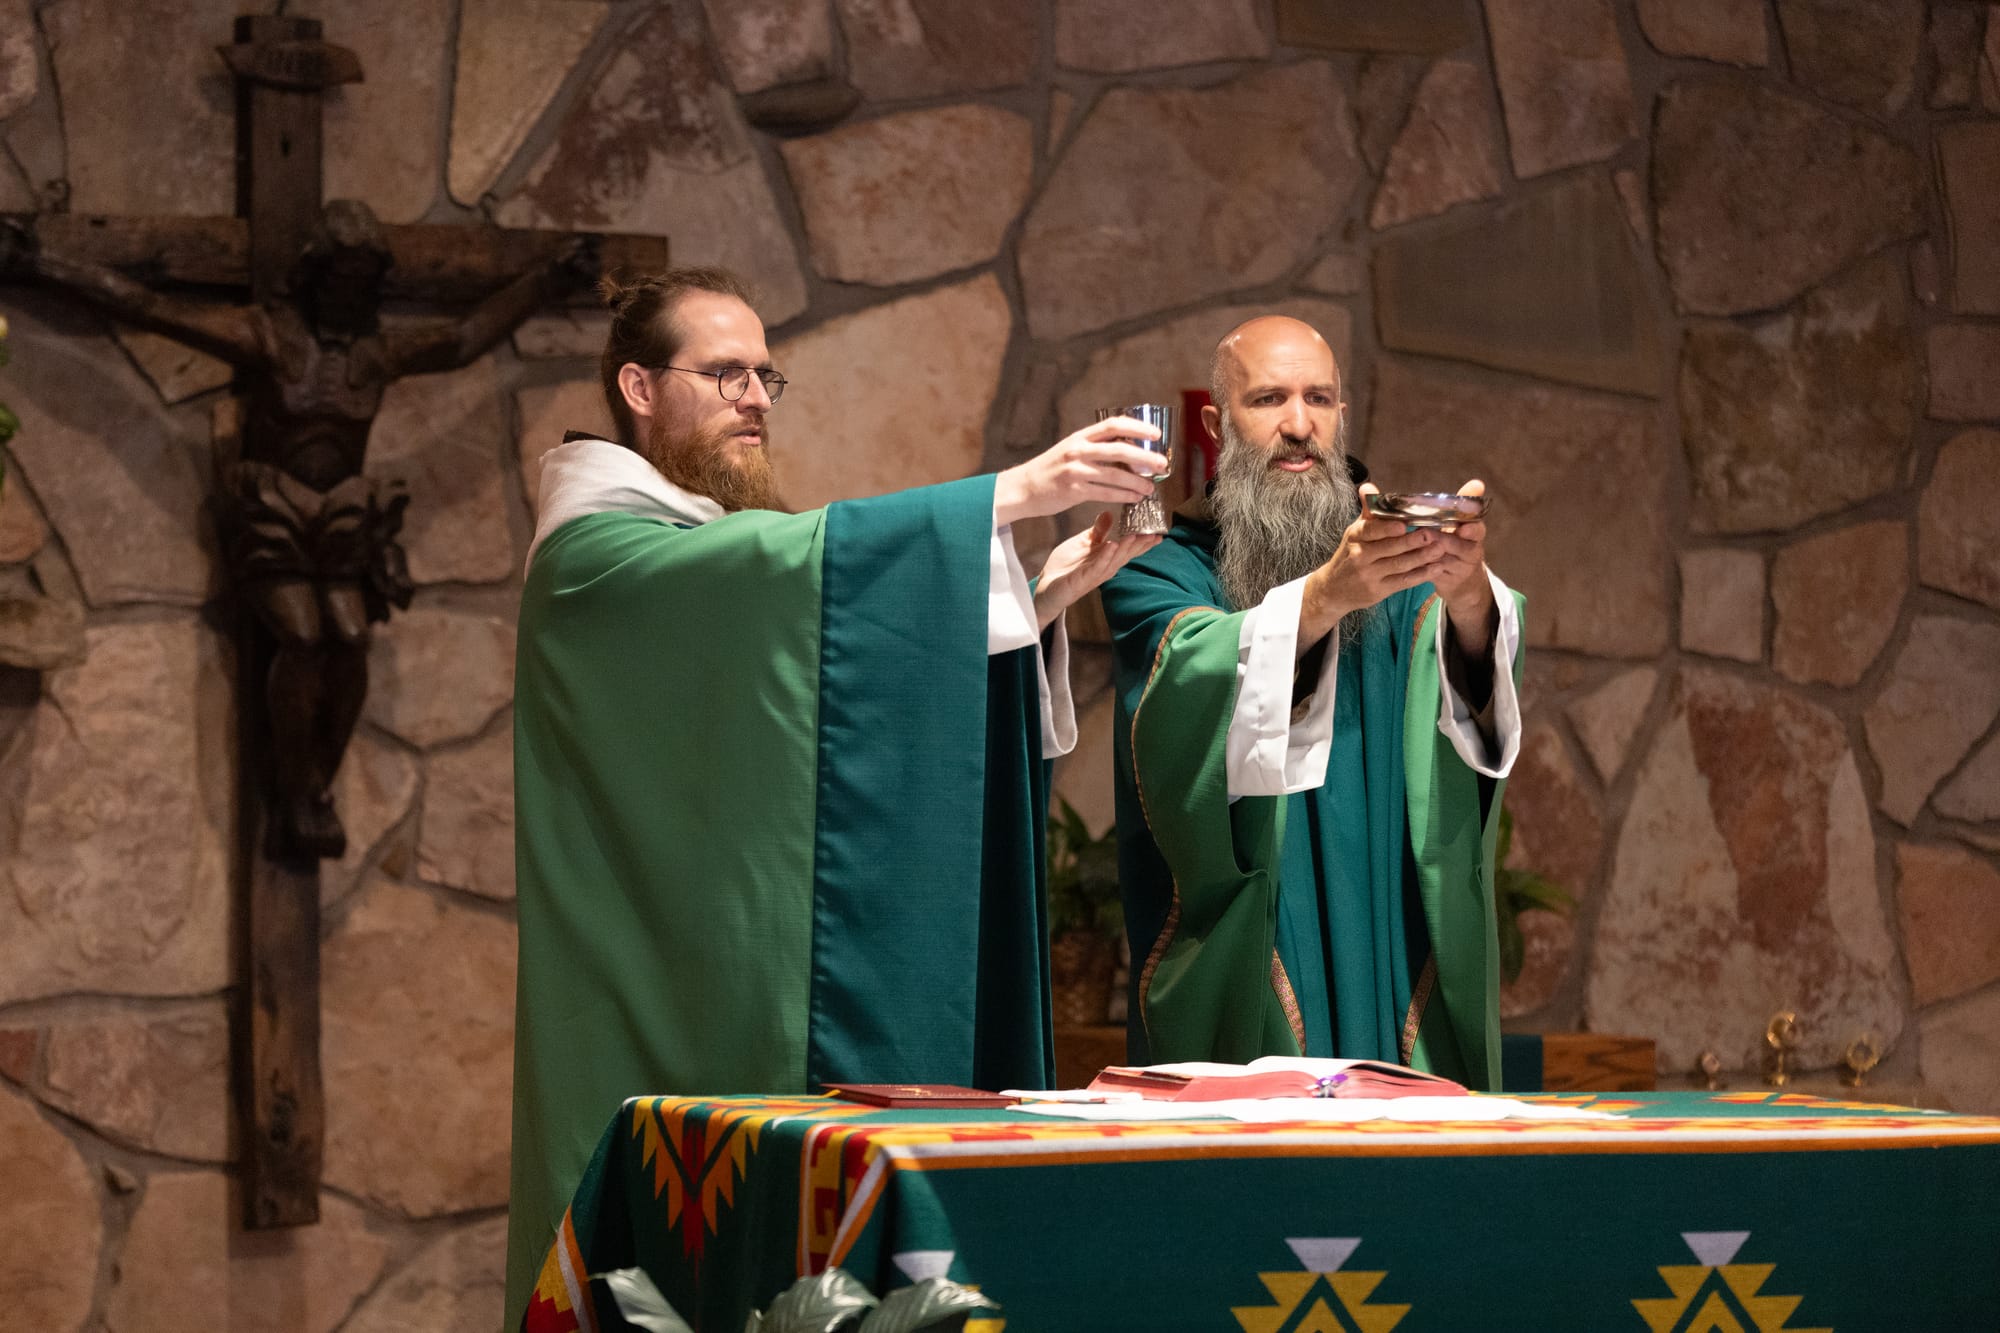 Friars Thomas Skowron and Mike Dorn elevate the body and blood of Jesus during Mass at the Crow Parishes. They are wearing green vestments signifying that it is Ordinary Time.